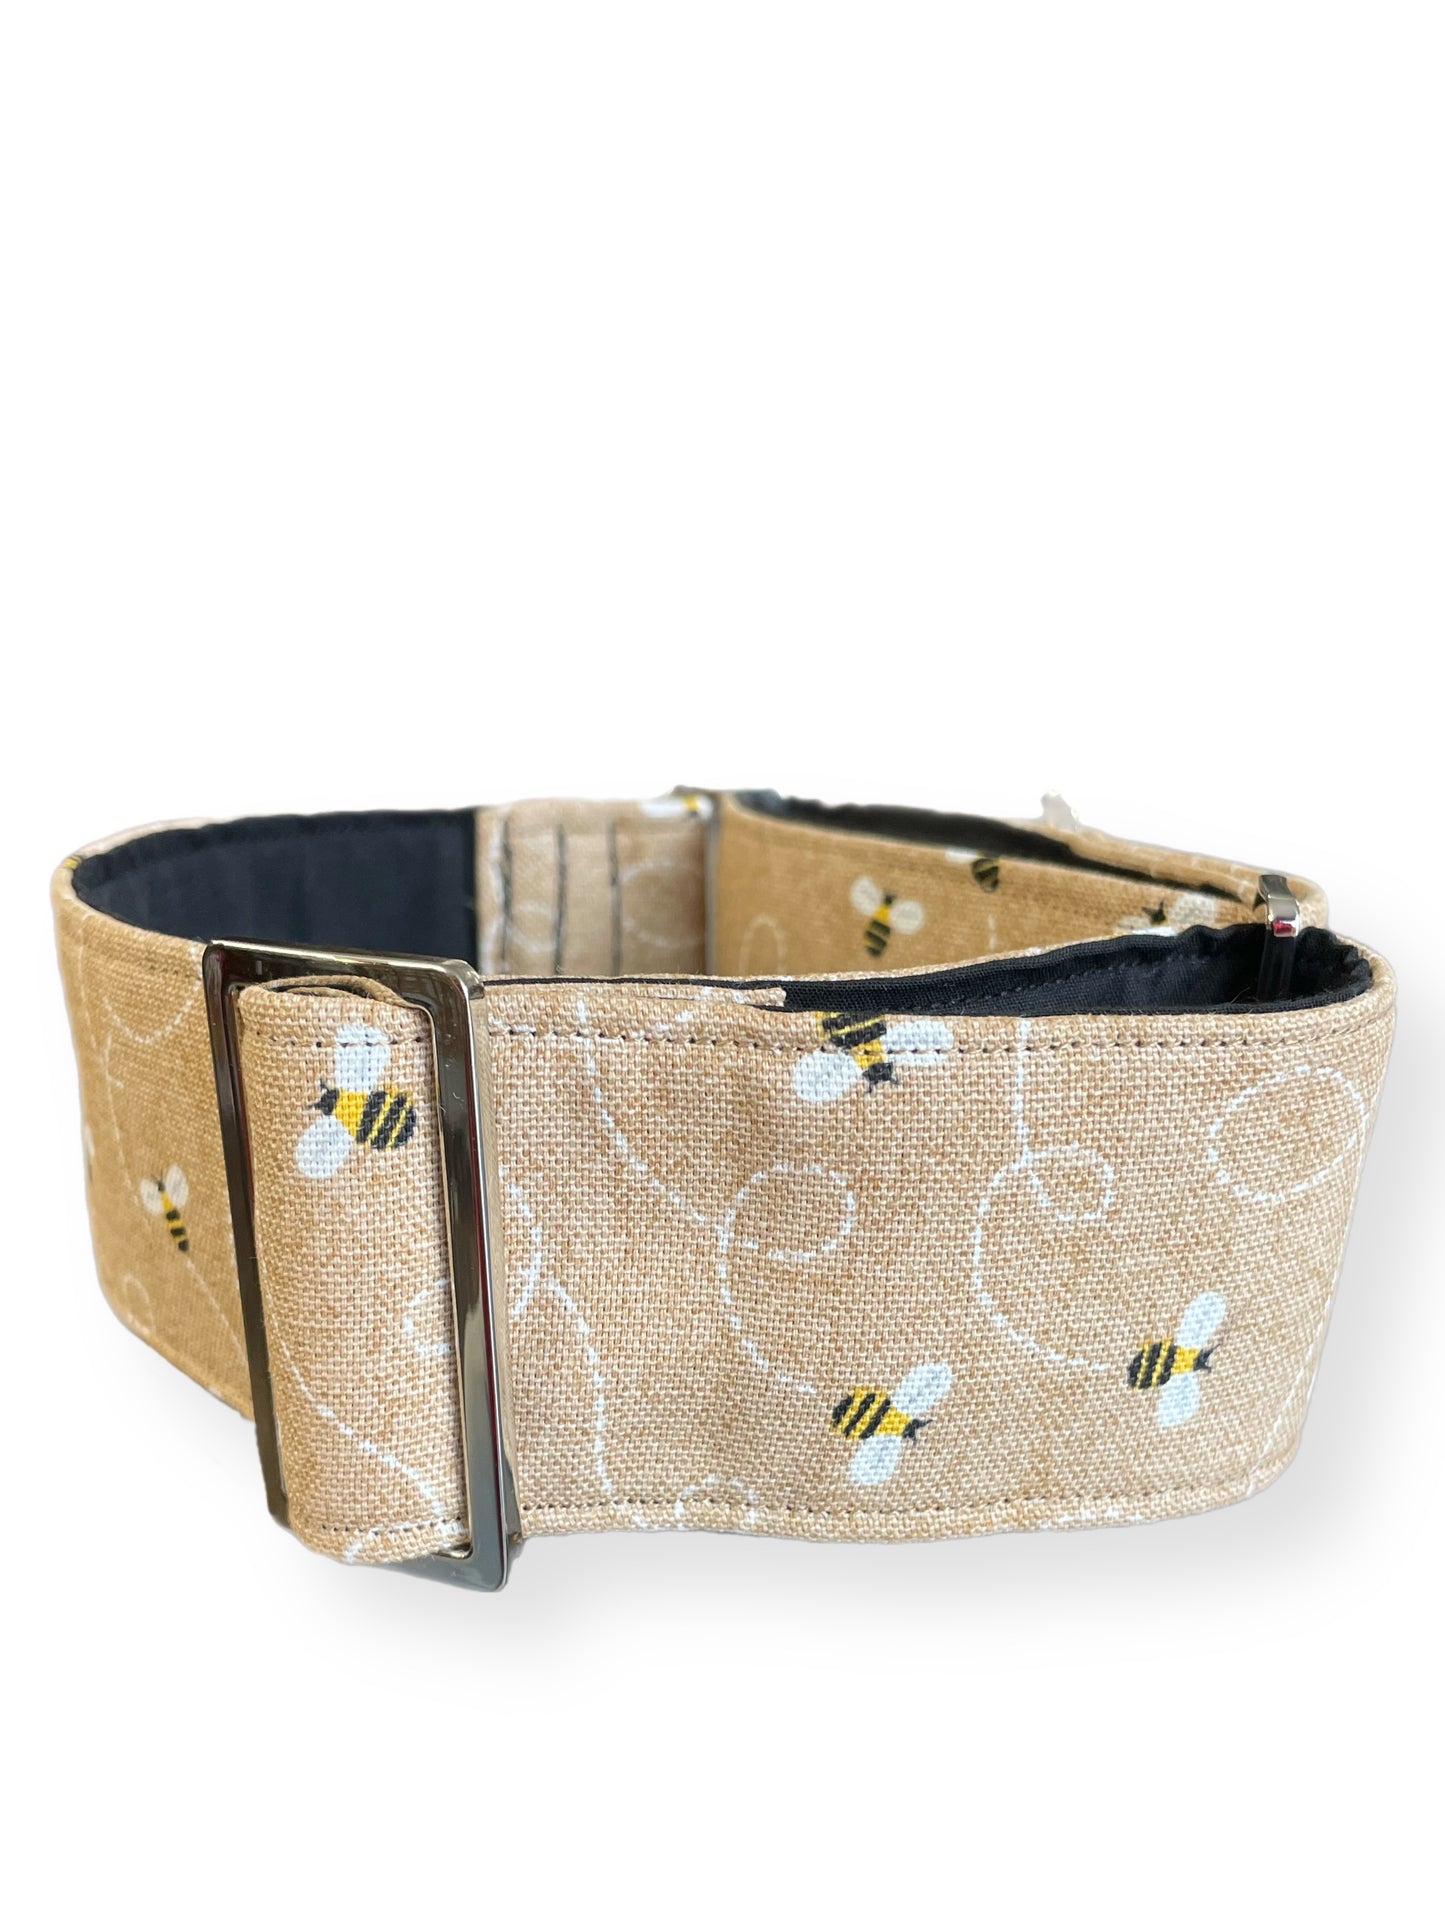 Dont bee beige greyhound Martingale collar cotton covered 50mm width super soft